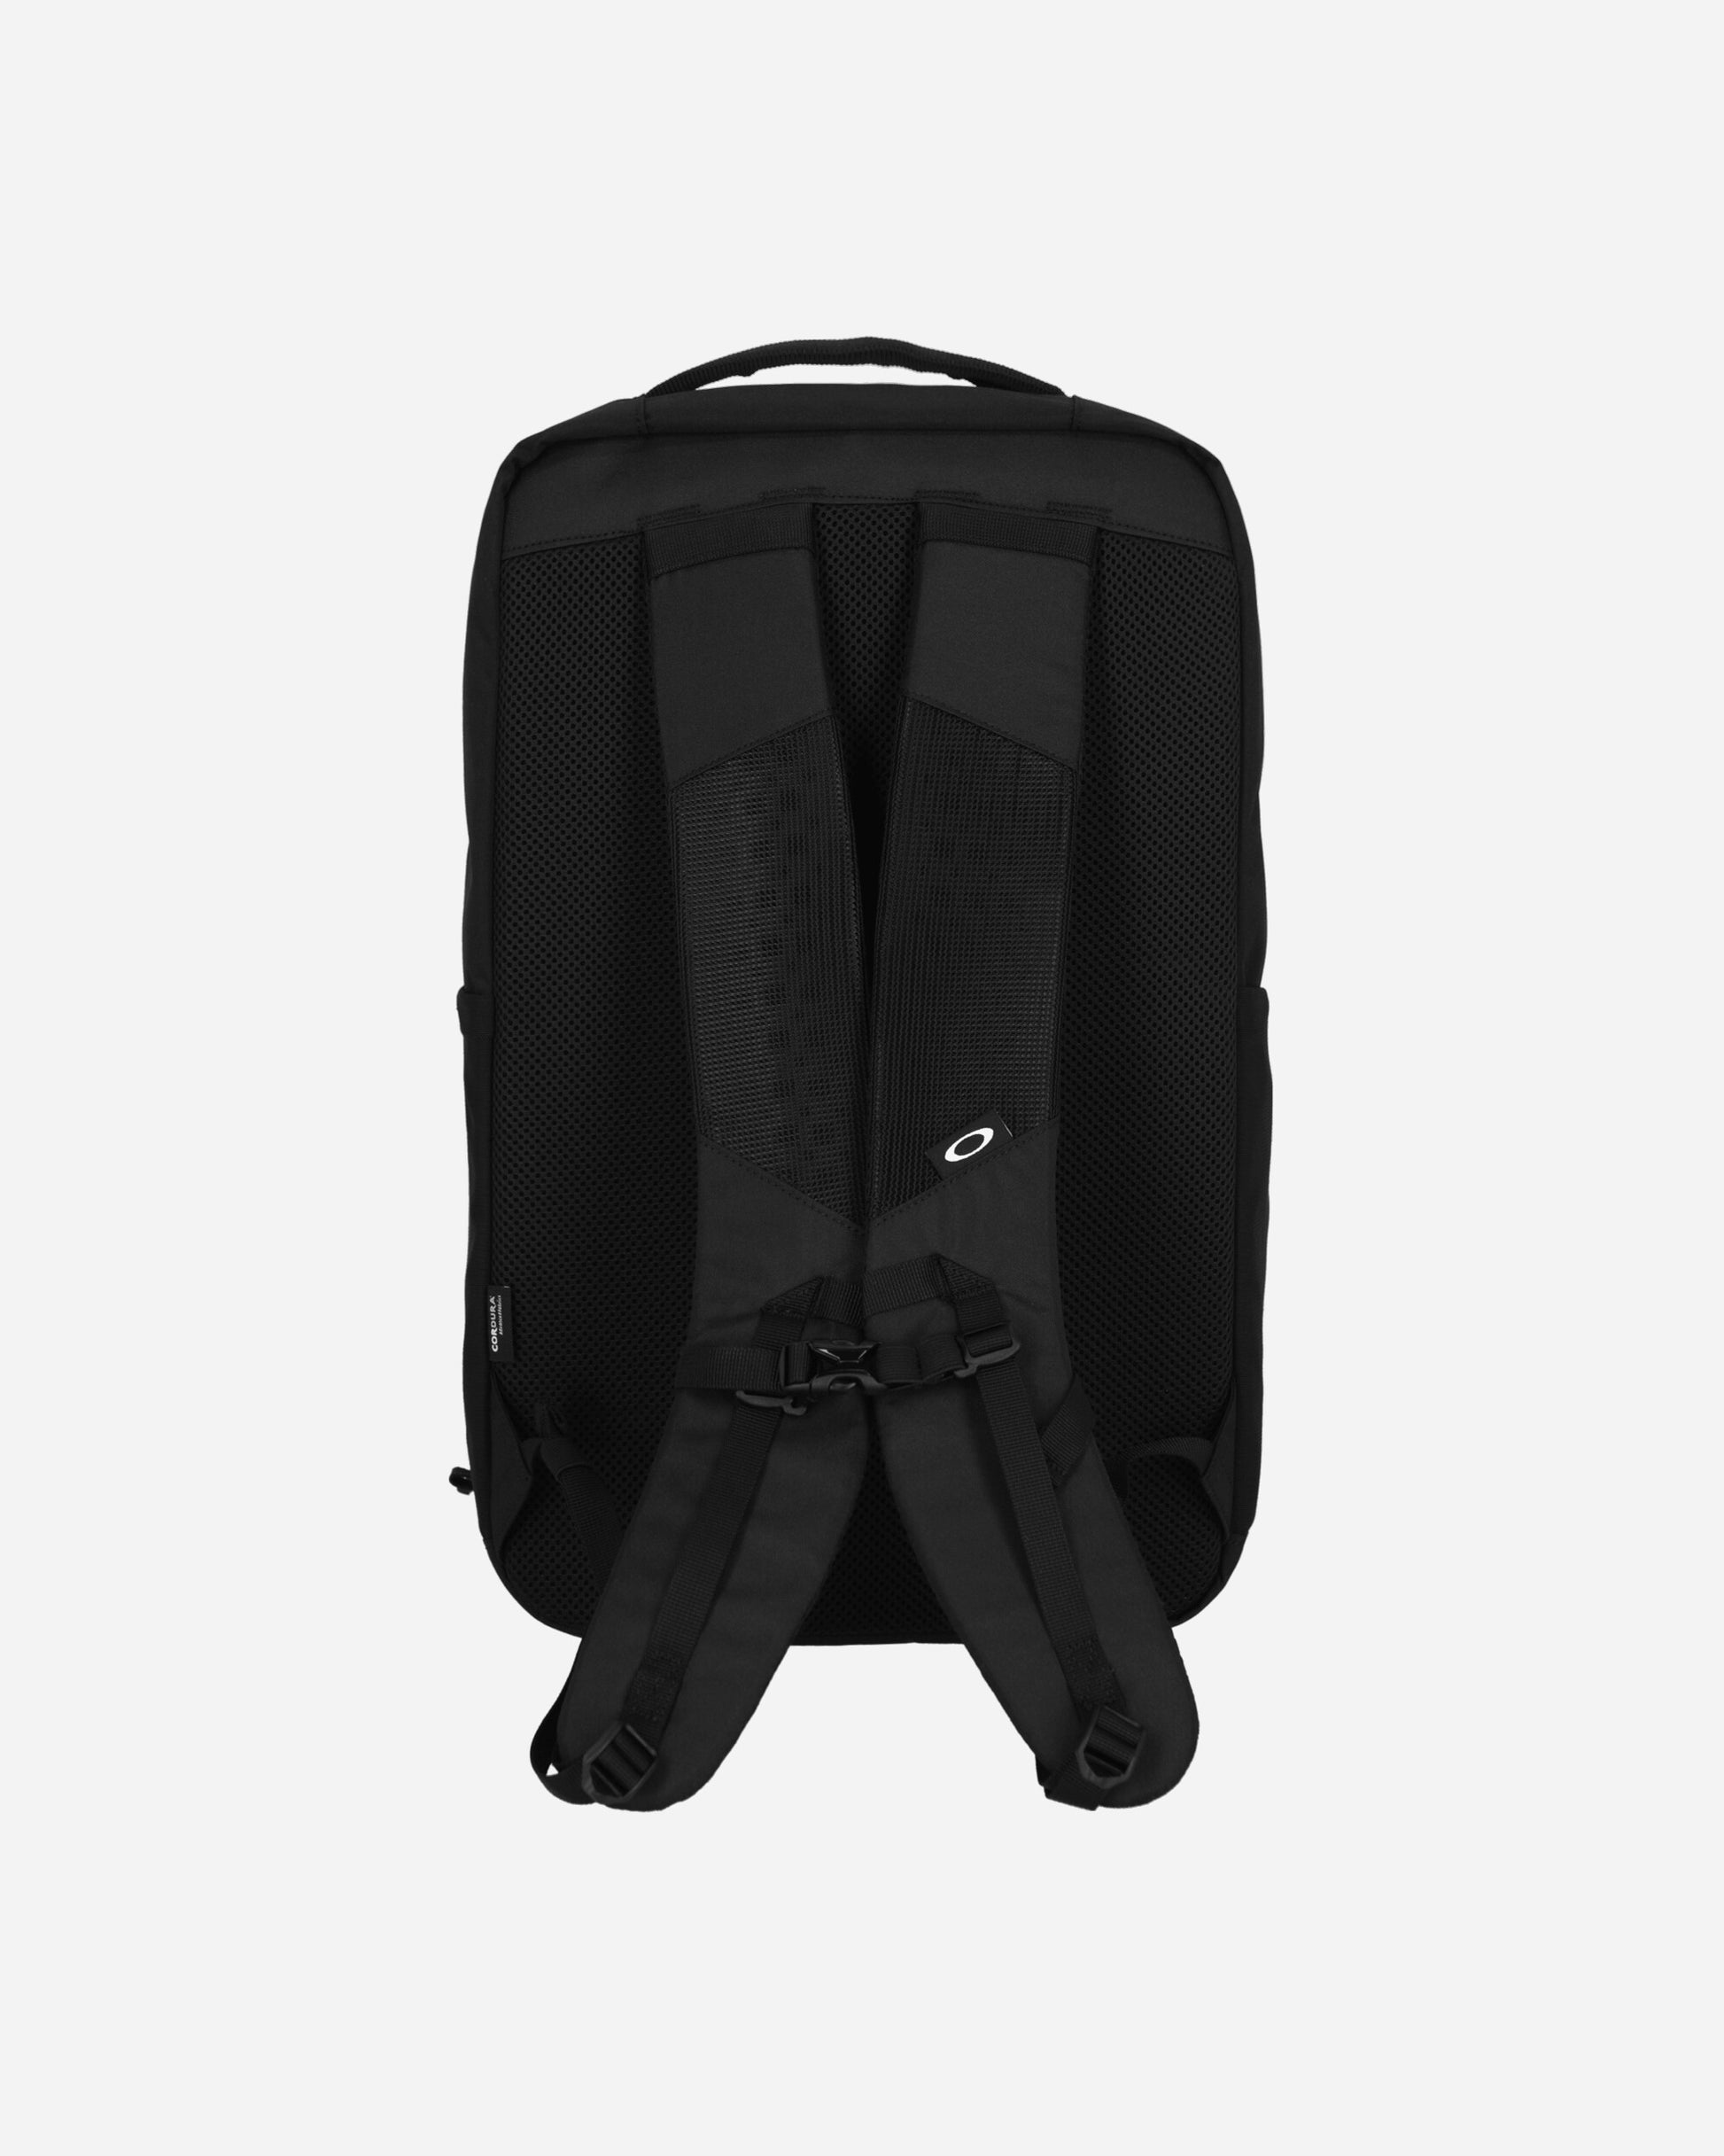 Oakley Essential Backpack M 8.0 Blackout Bags and Backpacks Backpacks FOS901737 02E